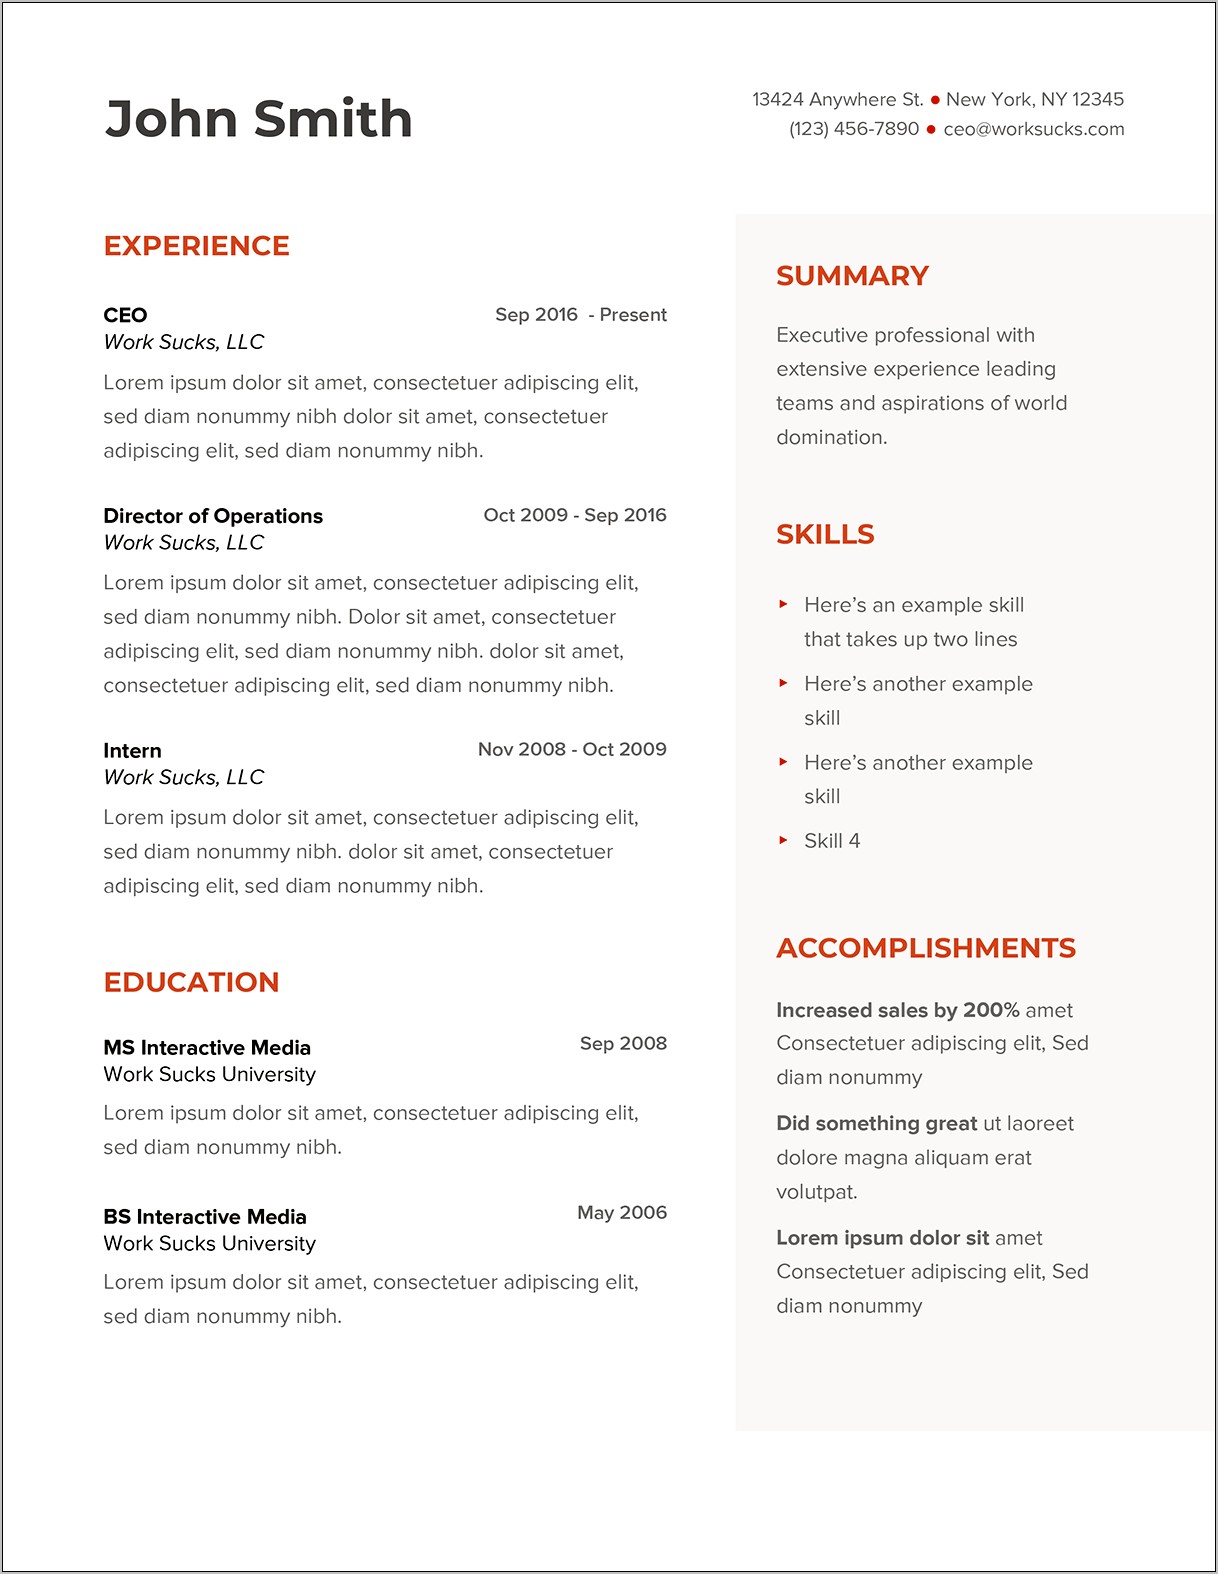 Resume Templates That Don't Suck